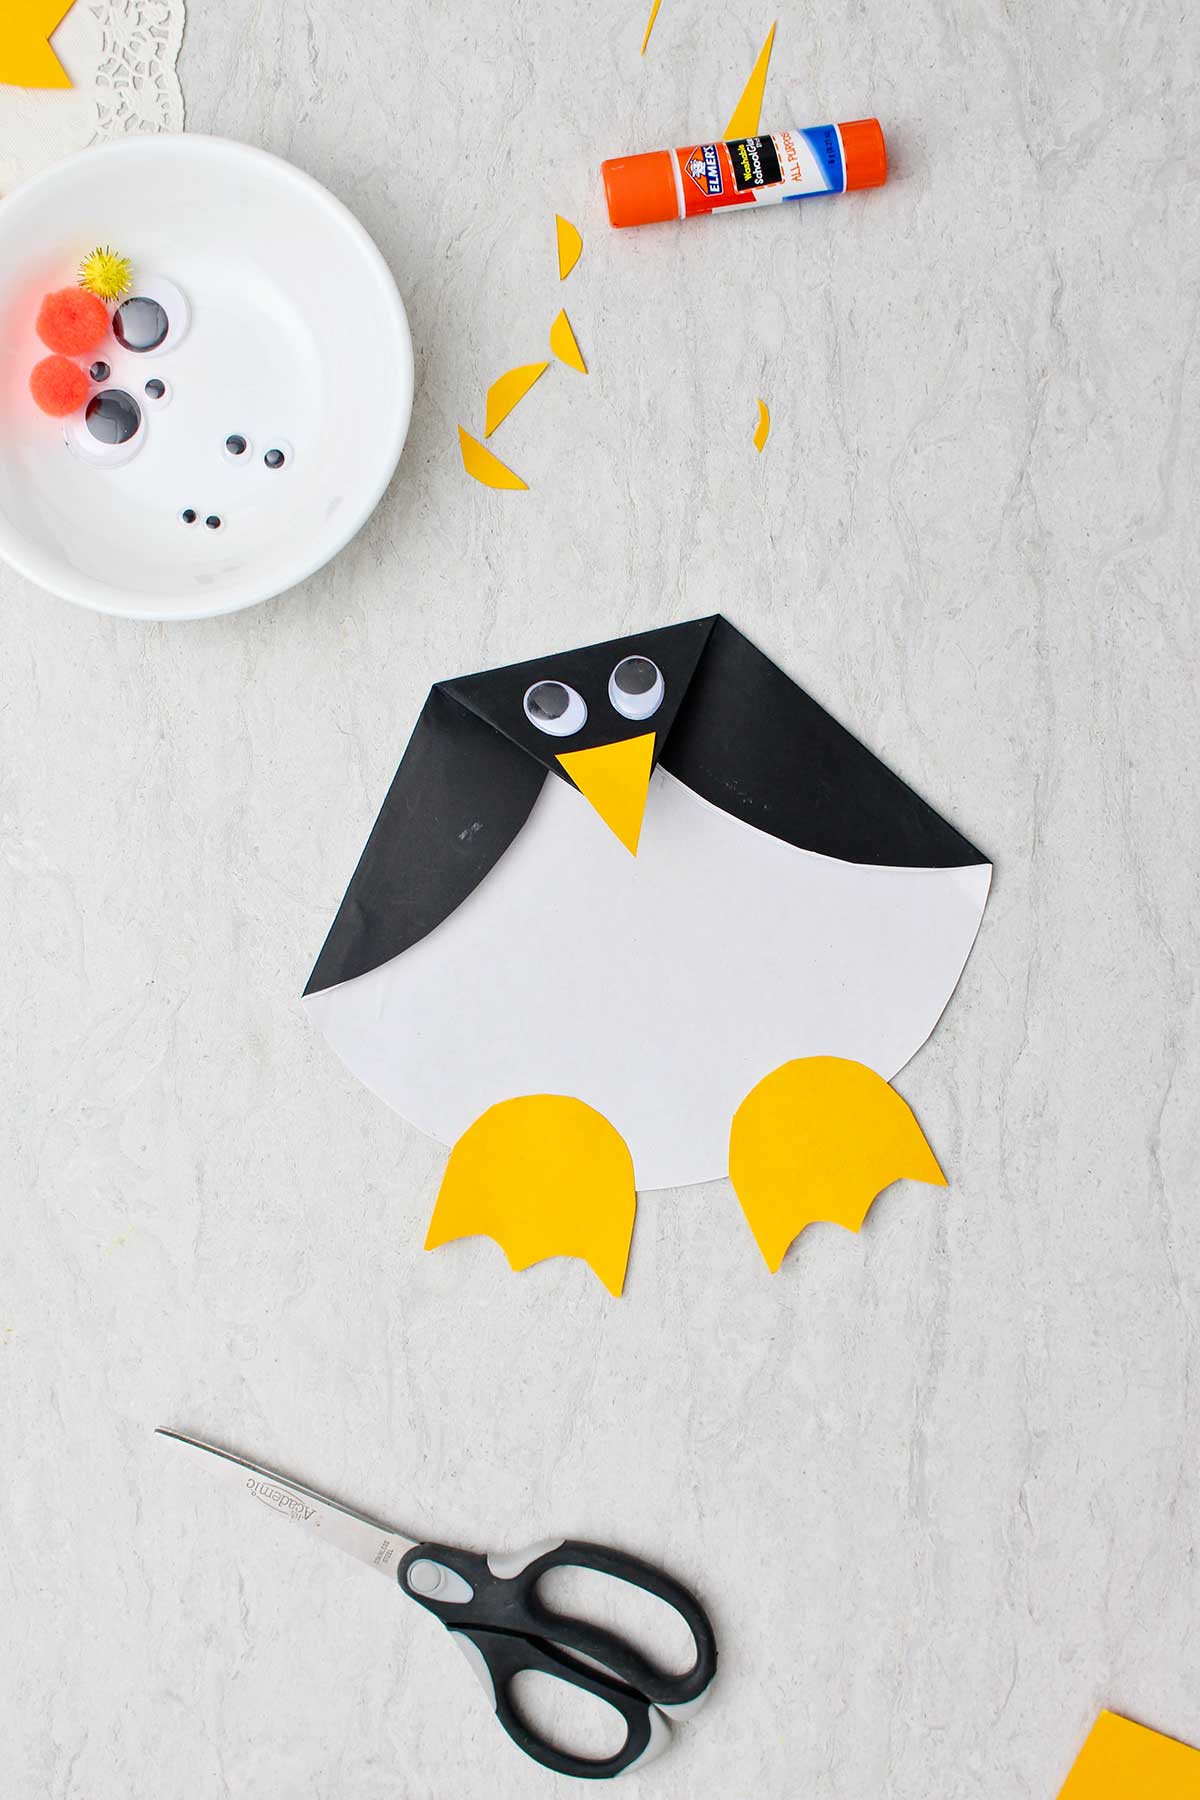 Completed Paper Penguin Craft with googly eyes and other supplies near by.